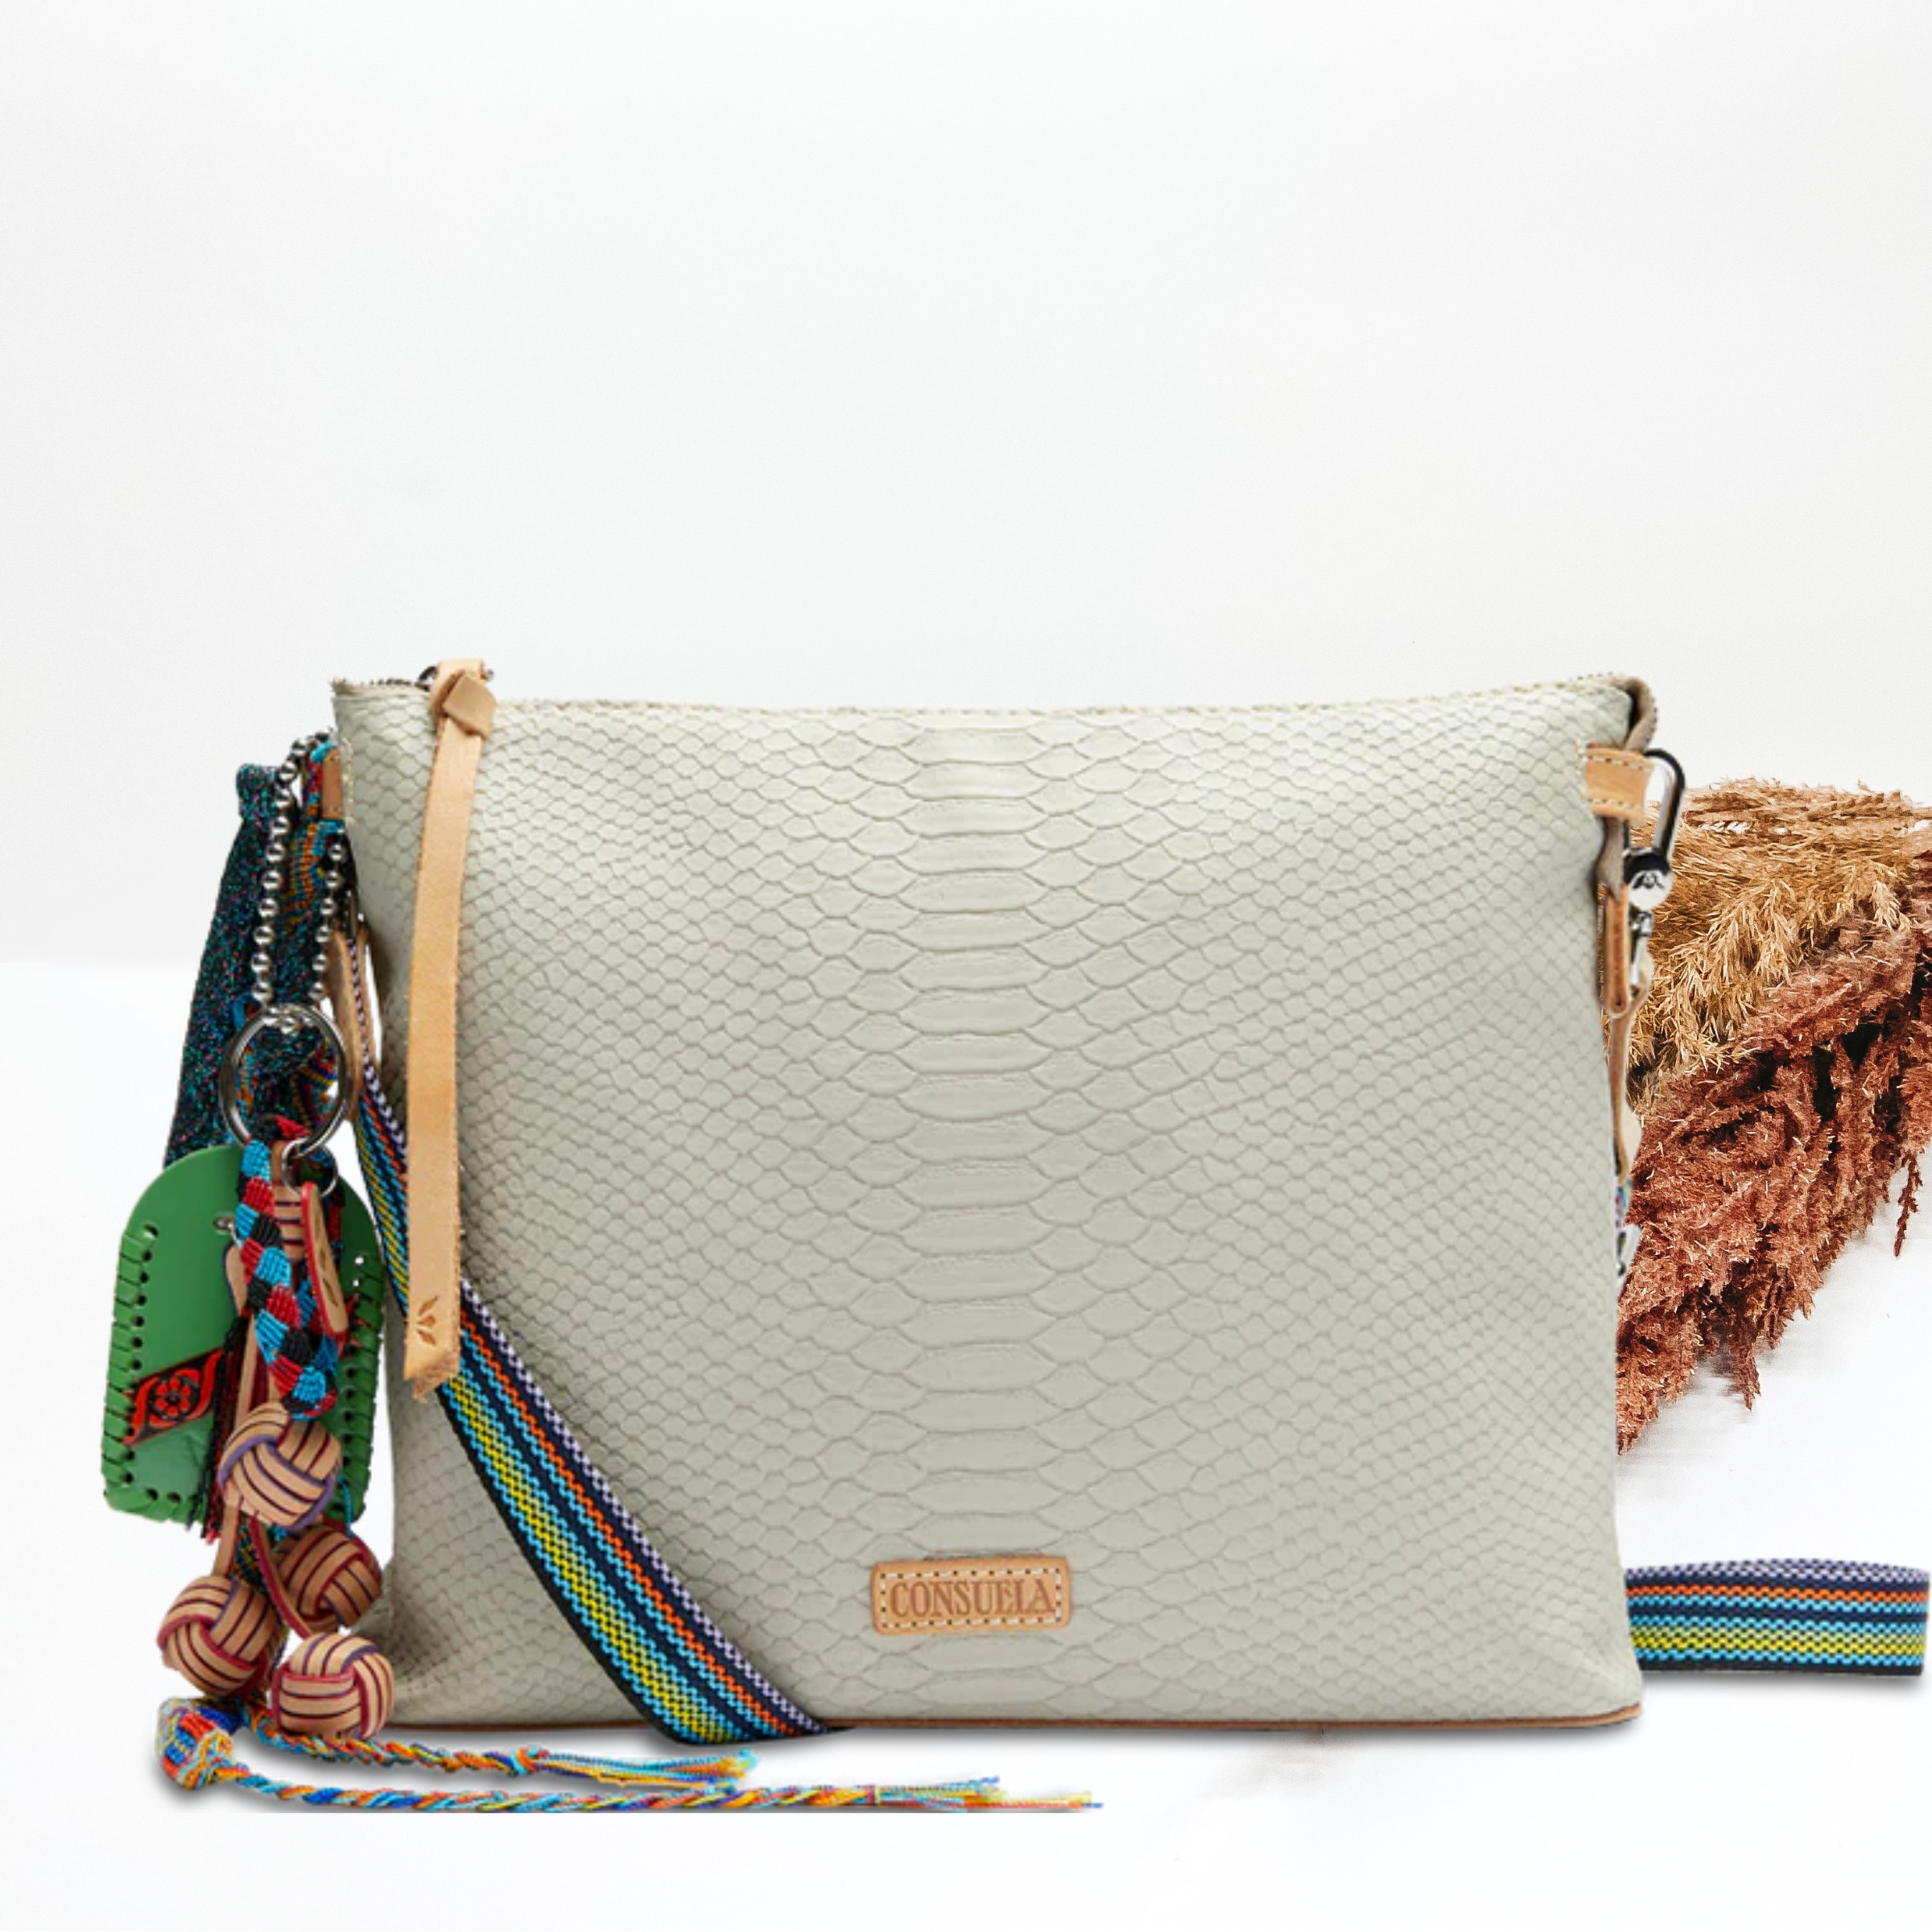 An ivory snake print crossbody purse. Pictured on white background with brown pompous grass on the right side.